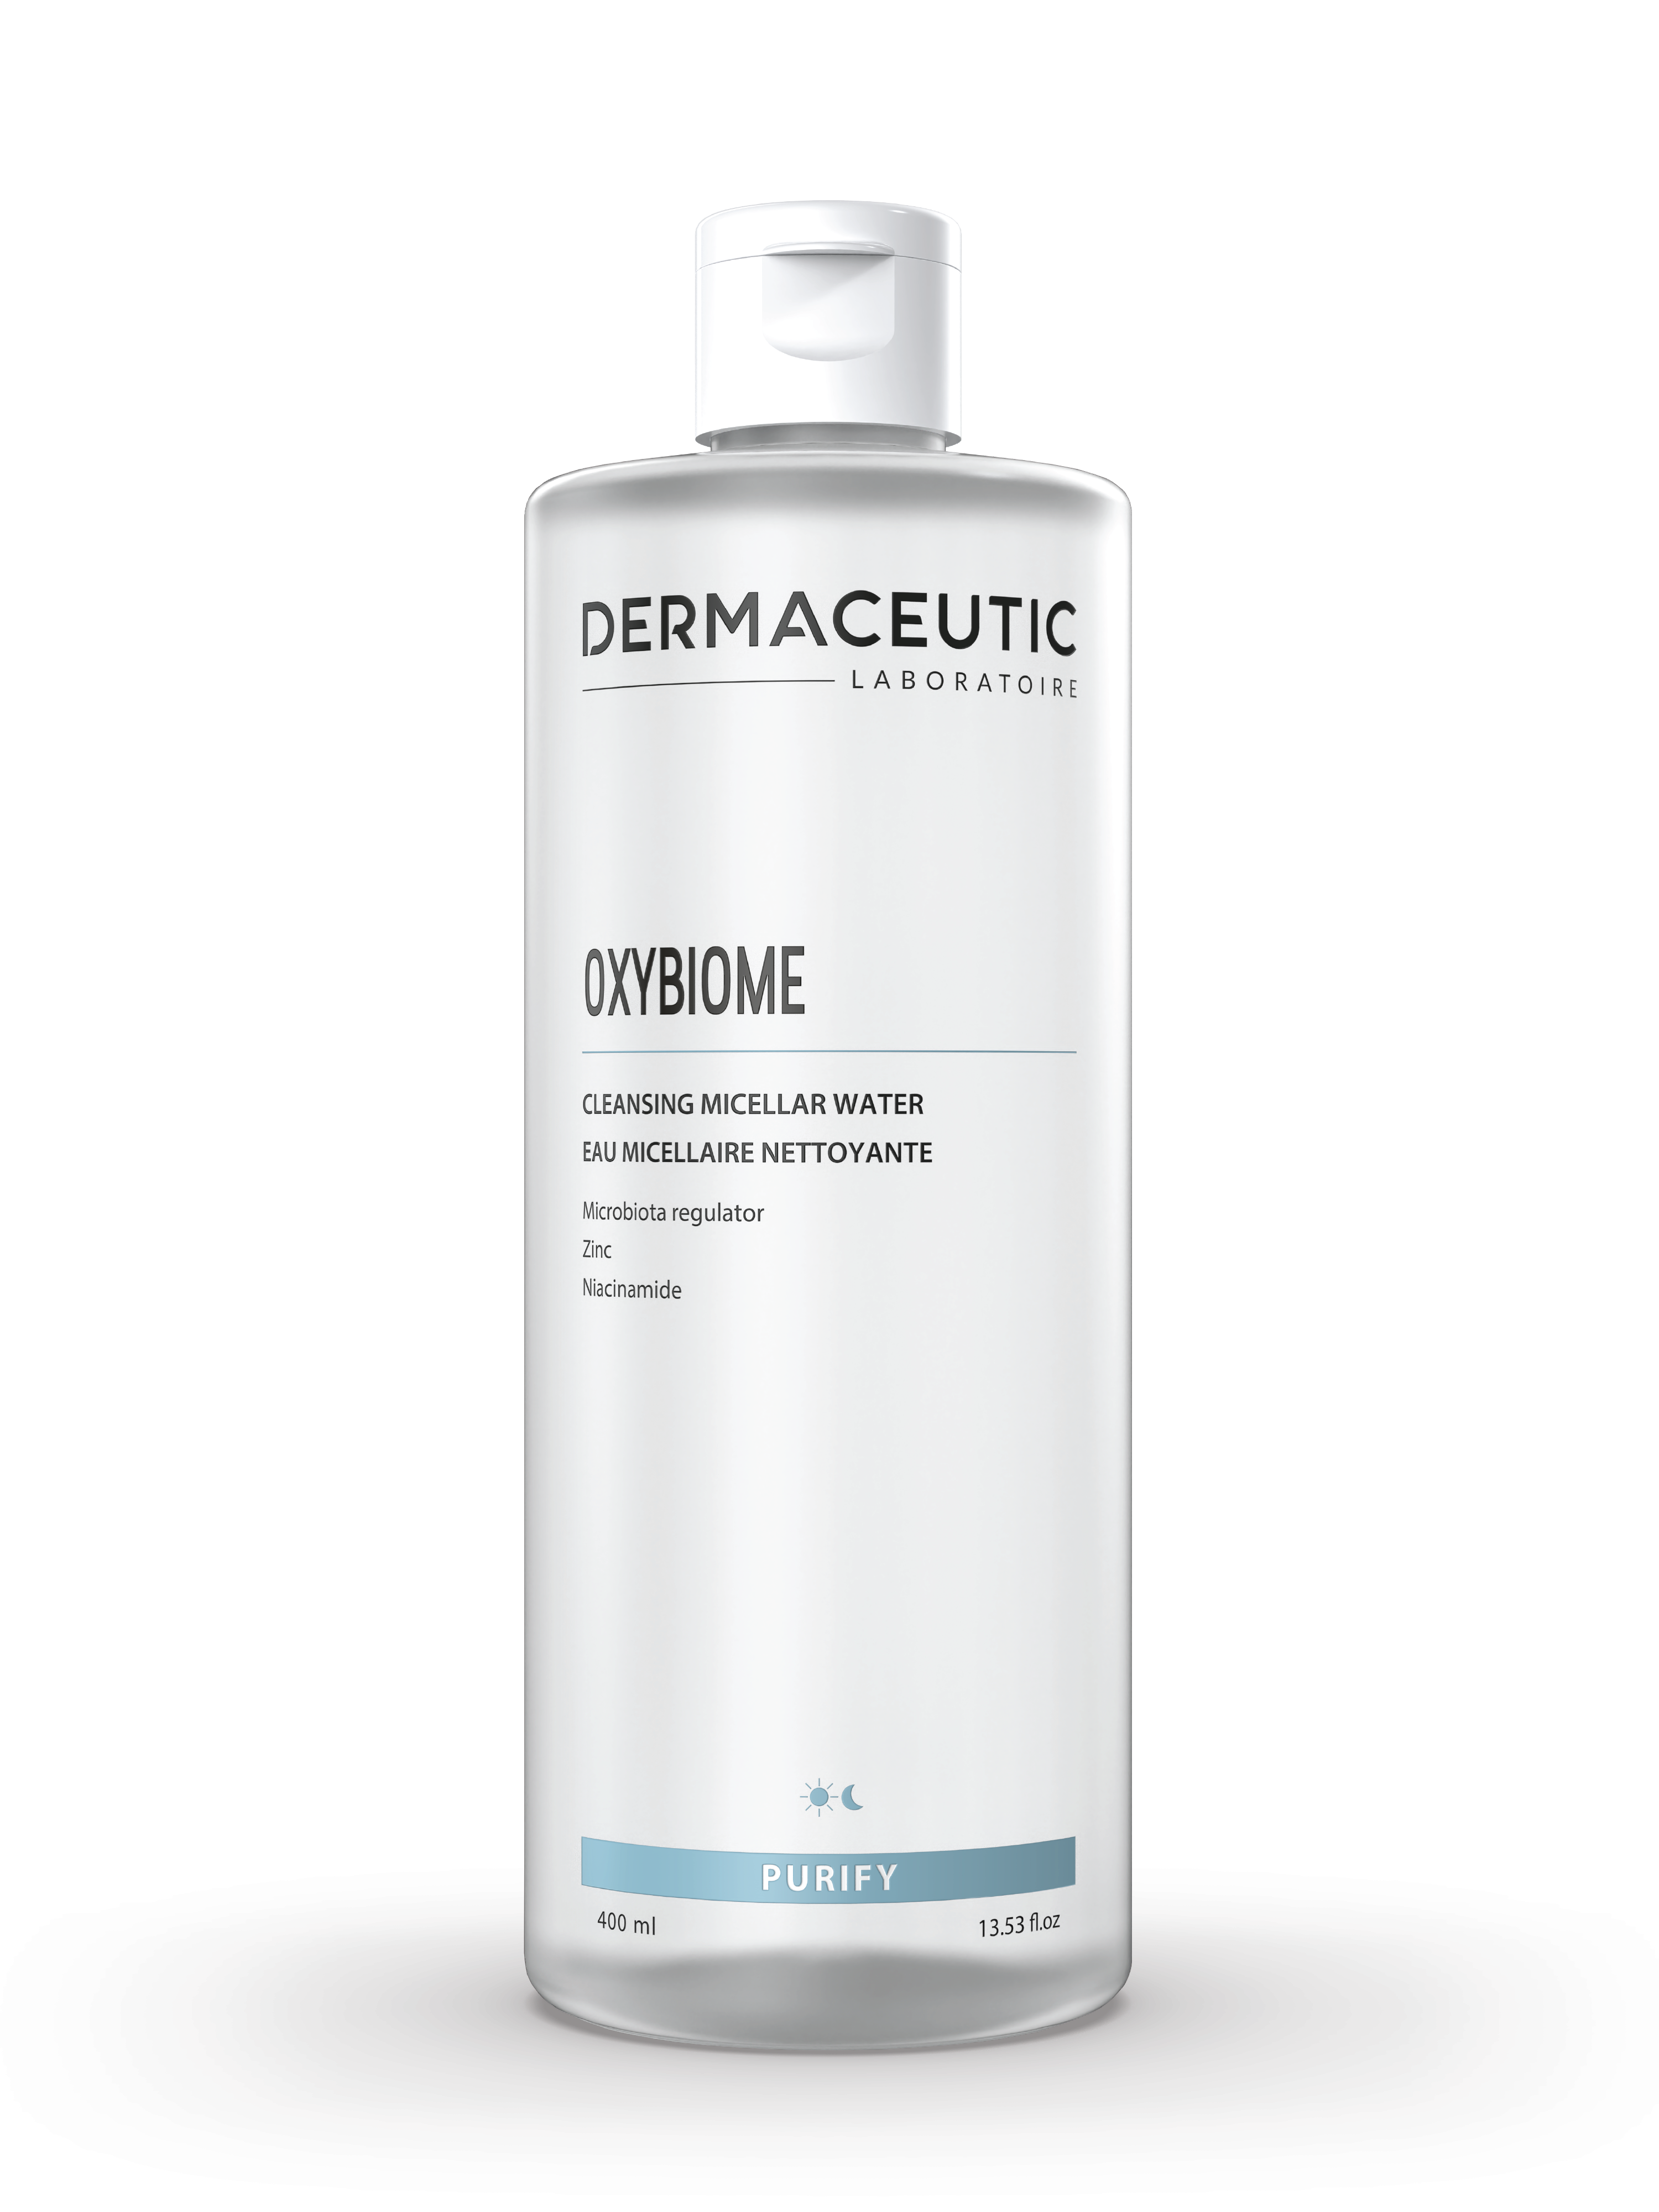 Dermaceutic Oxybiome Micellar Water, 400 ml